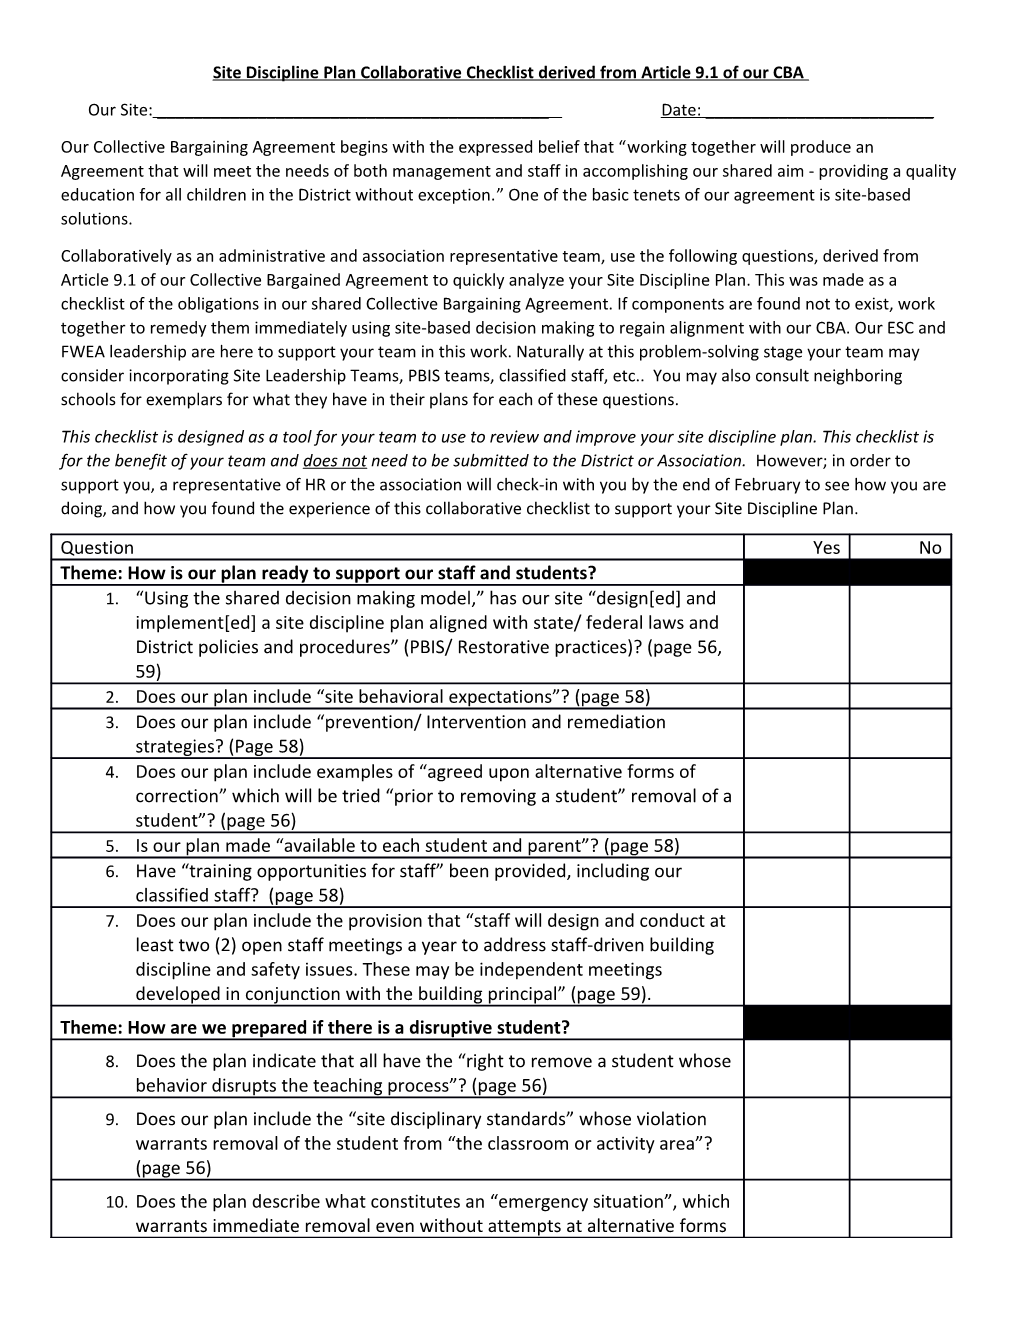 Site Discipline Plan Collaborative Checklist Derived from Article 9.1 of Our CBA